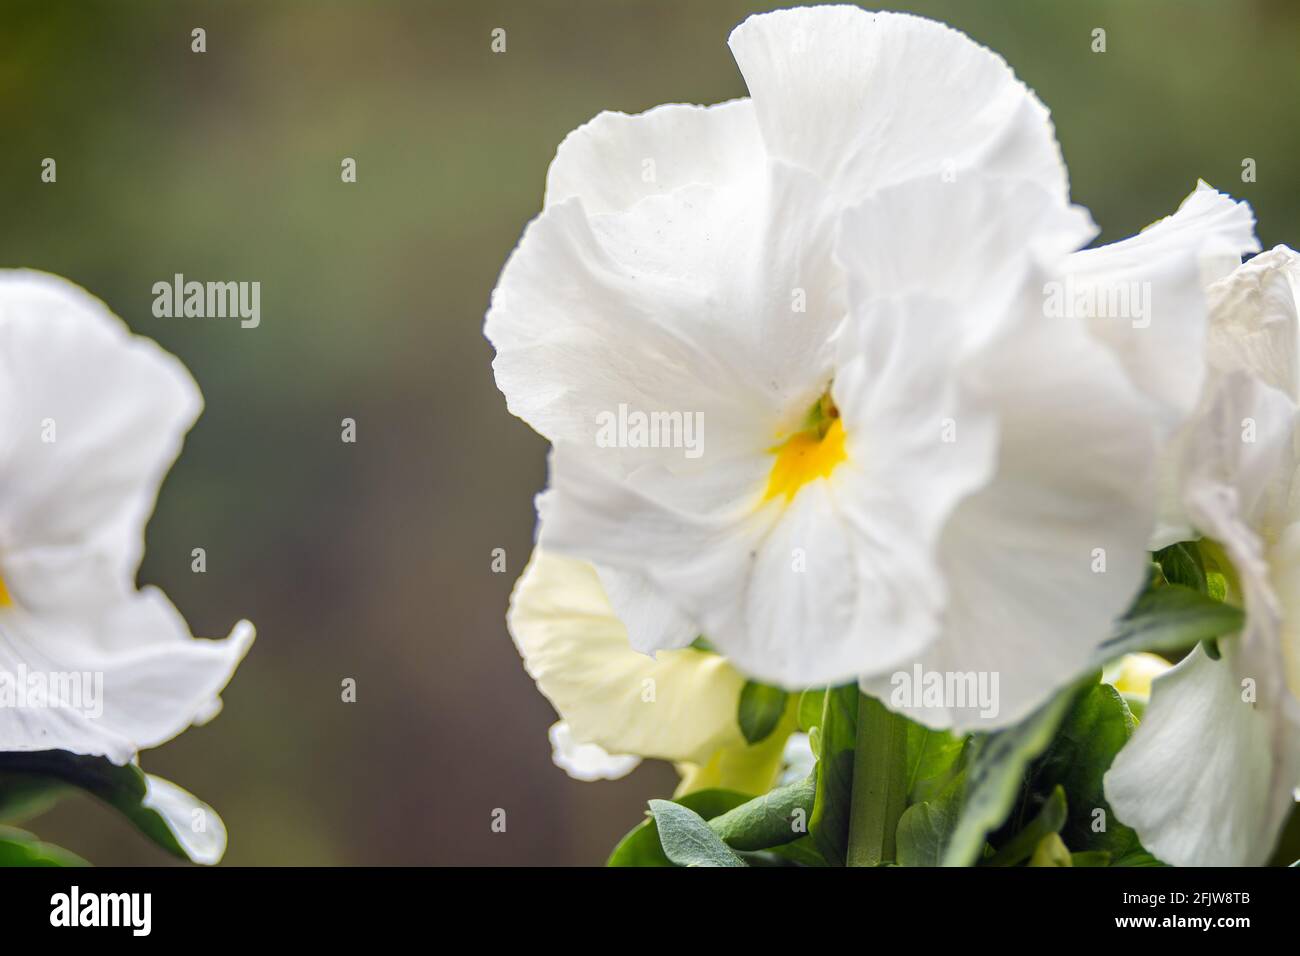 White pansy flowers close-up, backlit by the sun. Stock Photo